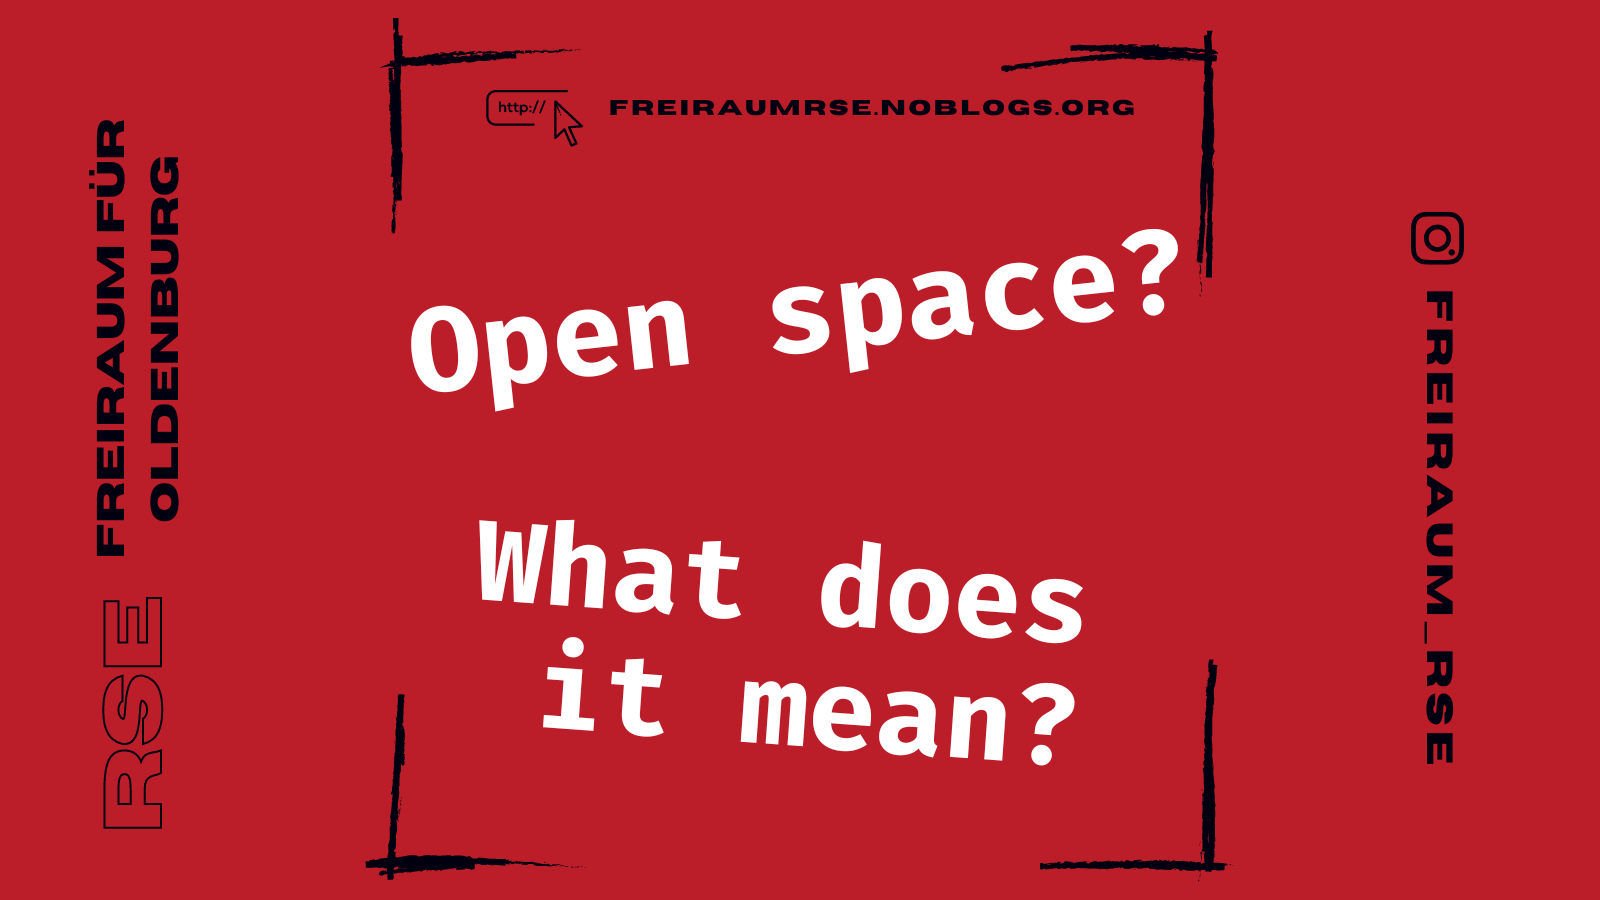 Open space? What does it mean?